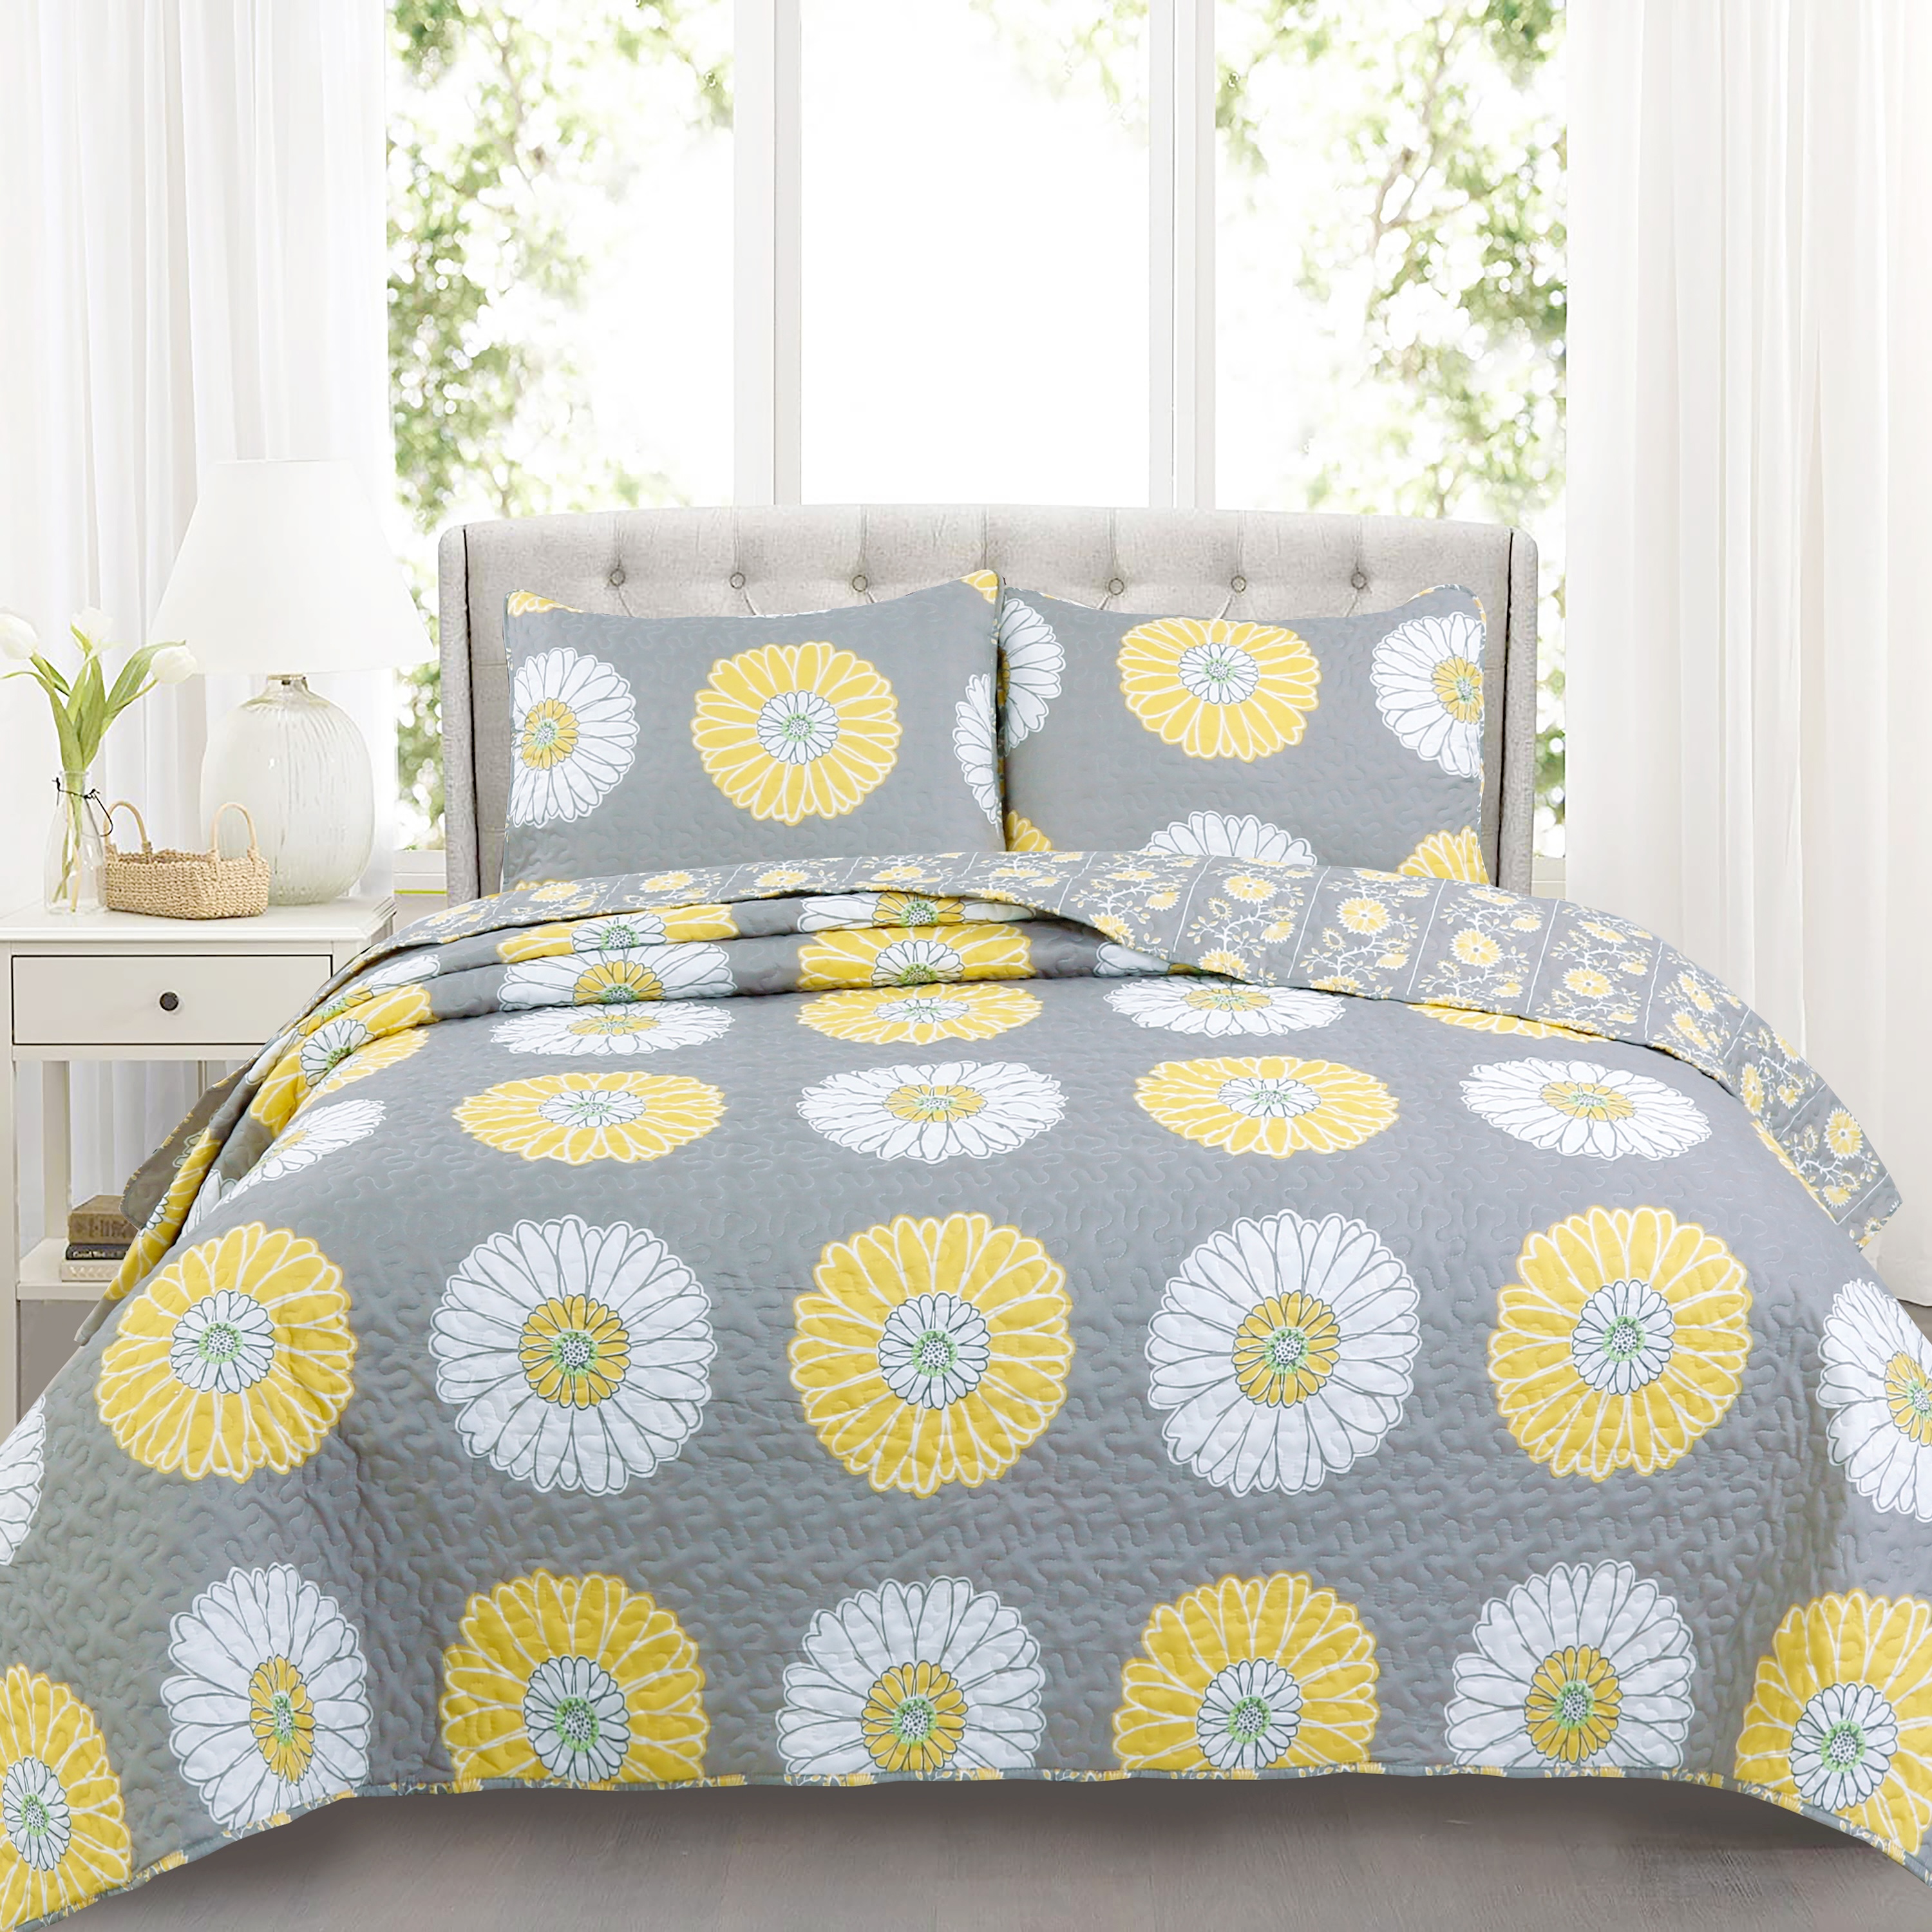 

Anya Floral Yellow Grey Reversible Quilt Bedding Set, Lightweight Bedspread Coverlet For All Seasons